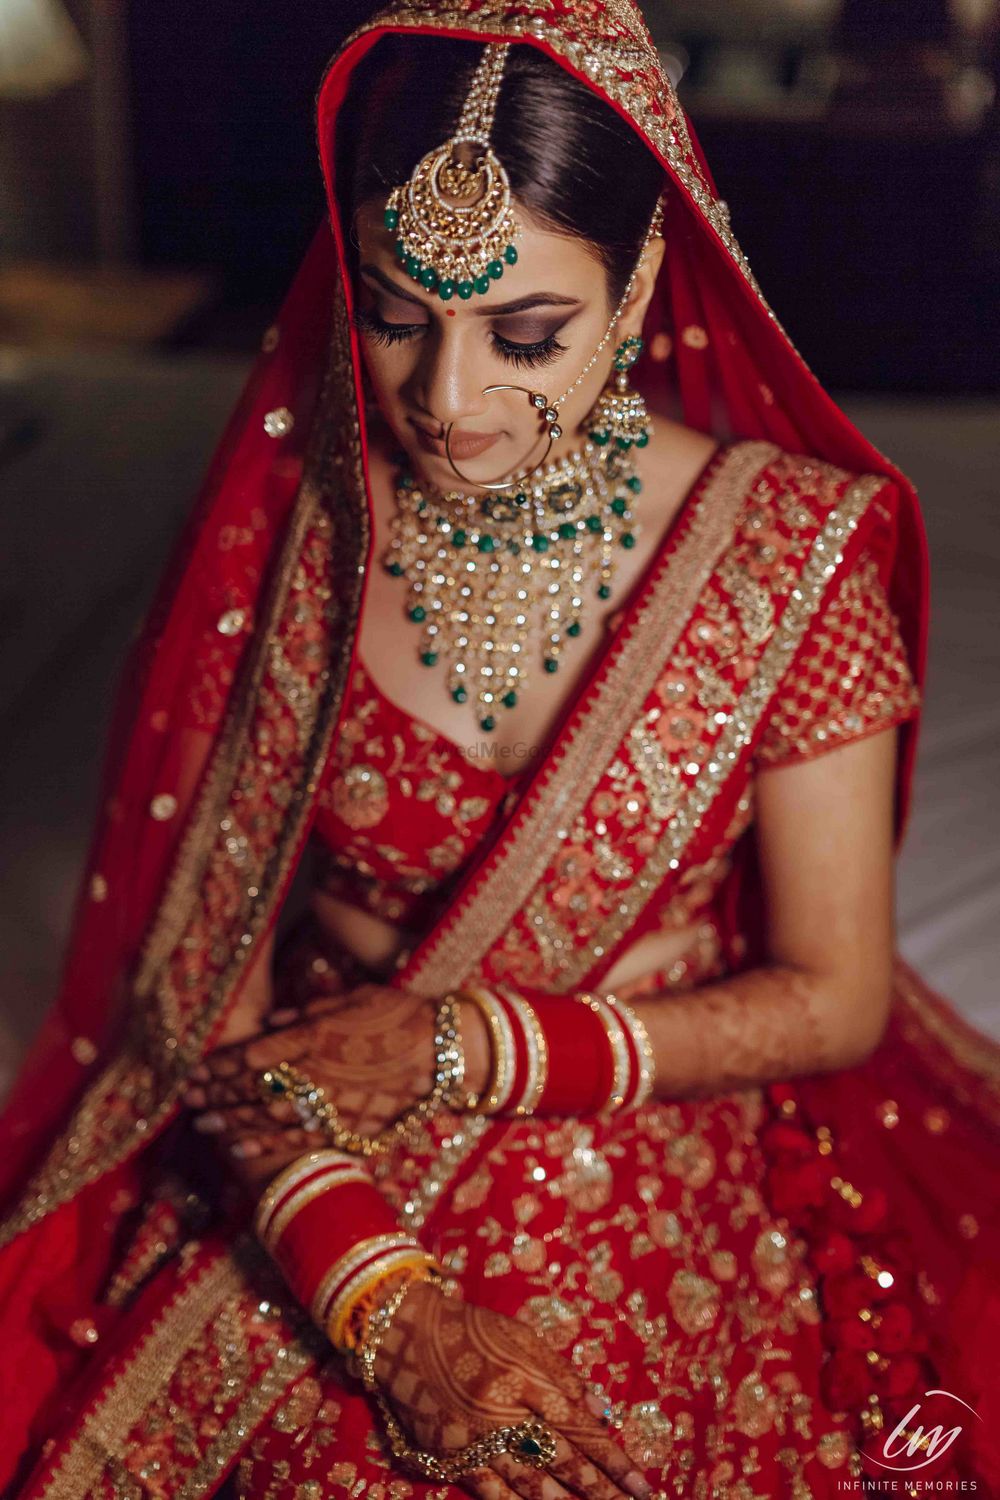 Photo of Bridal portrait with red lehenga and green jewellery